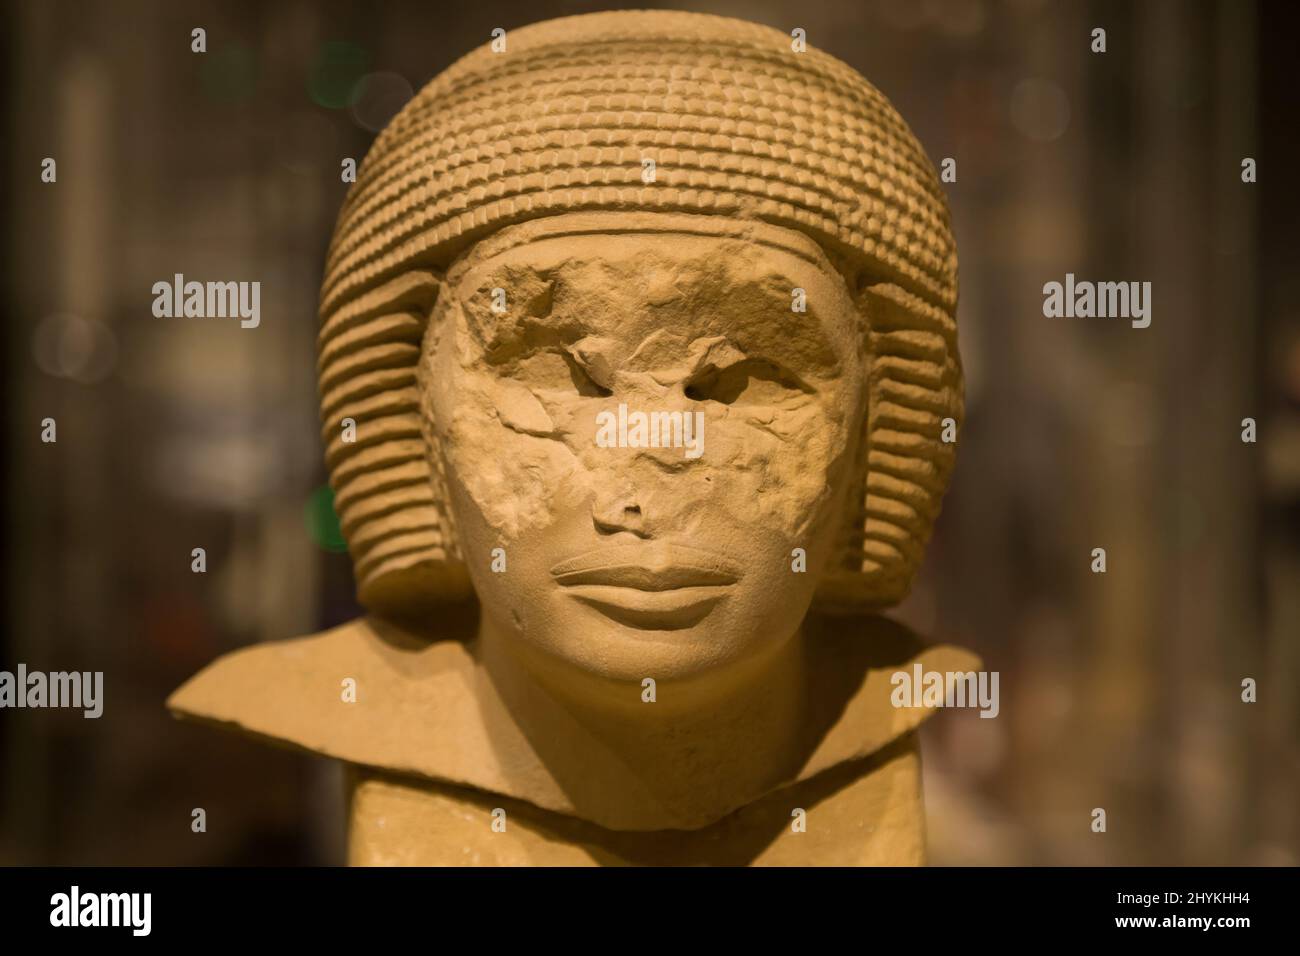 Torino, Italy - August 14, 2021: Incomplete statue of Iteti at the Egyptian Museum of Turin, Italy. Stock Photo